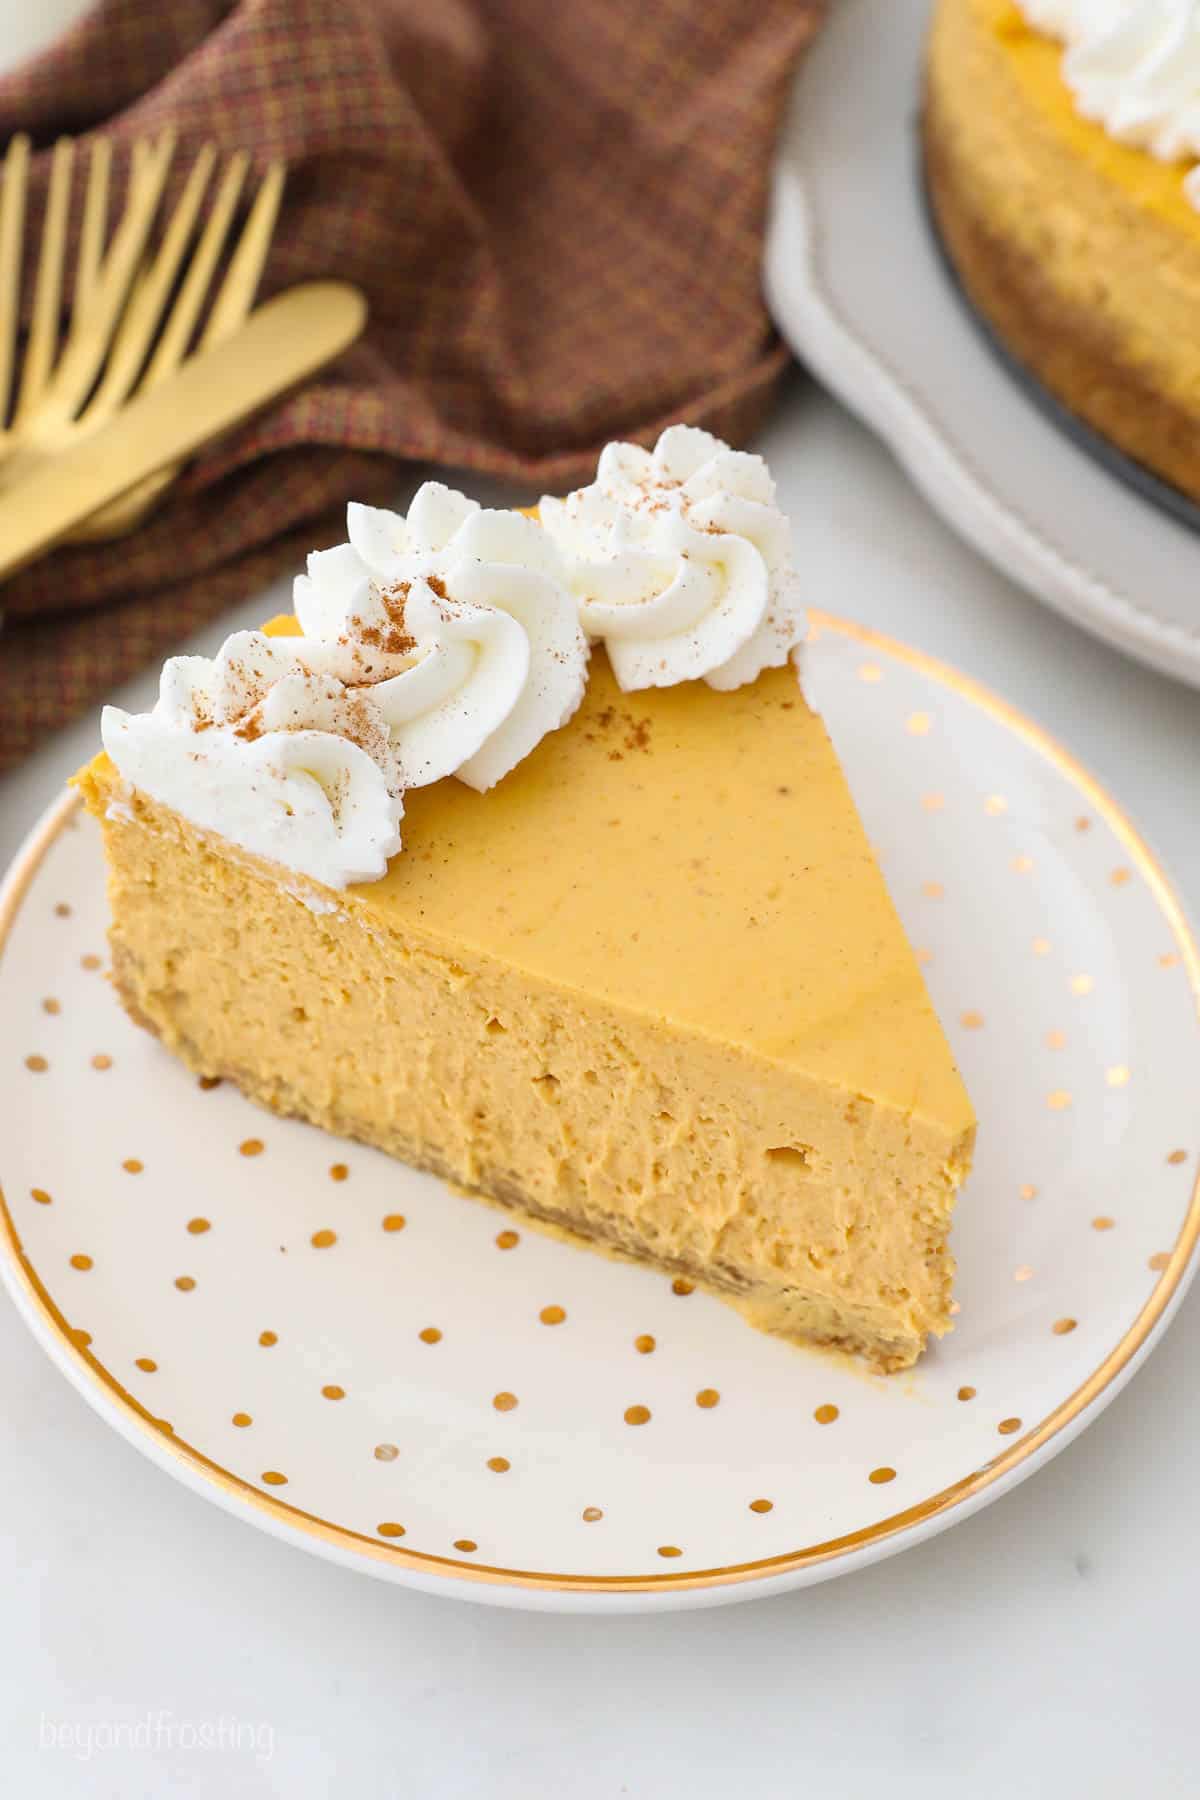 A single piece of pumpkin cheesecake on a white plate with a gold rim and gold speckles